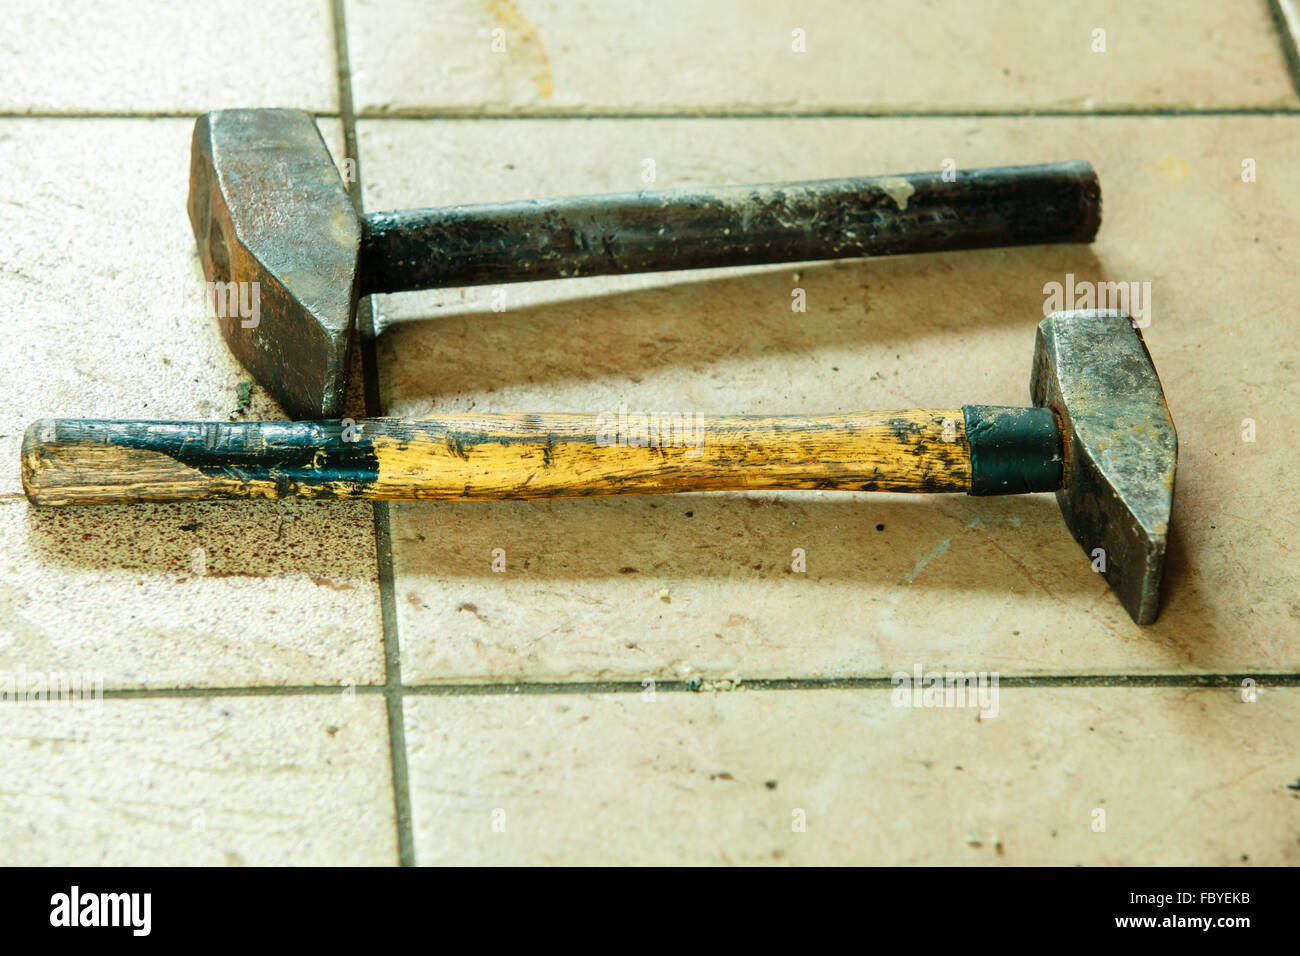 Two old sledge hammers hand tools in mechanic garage car service Stock Photo